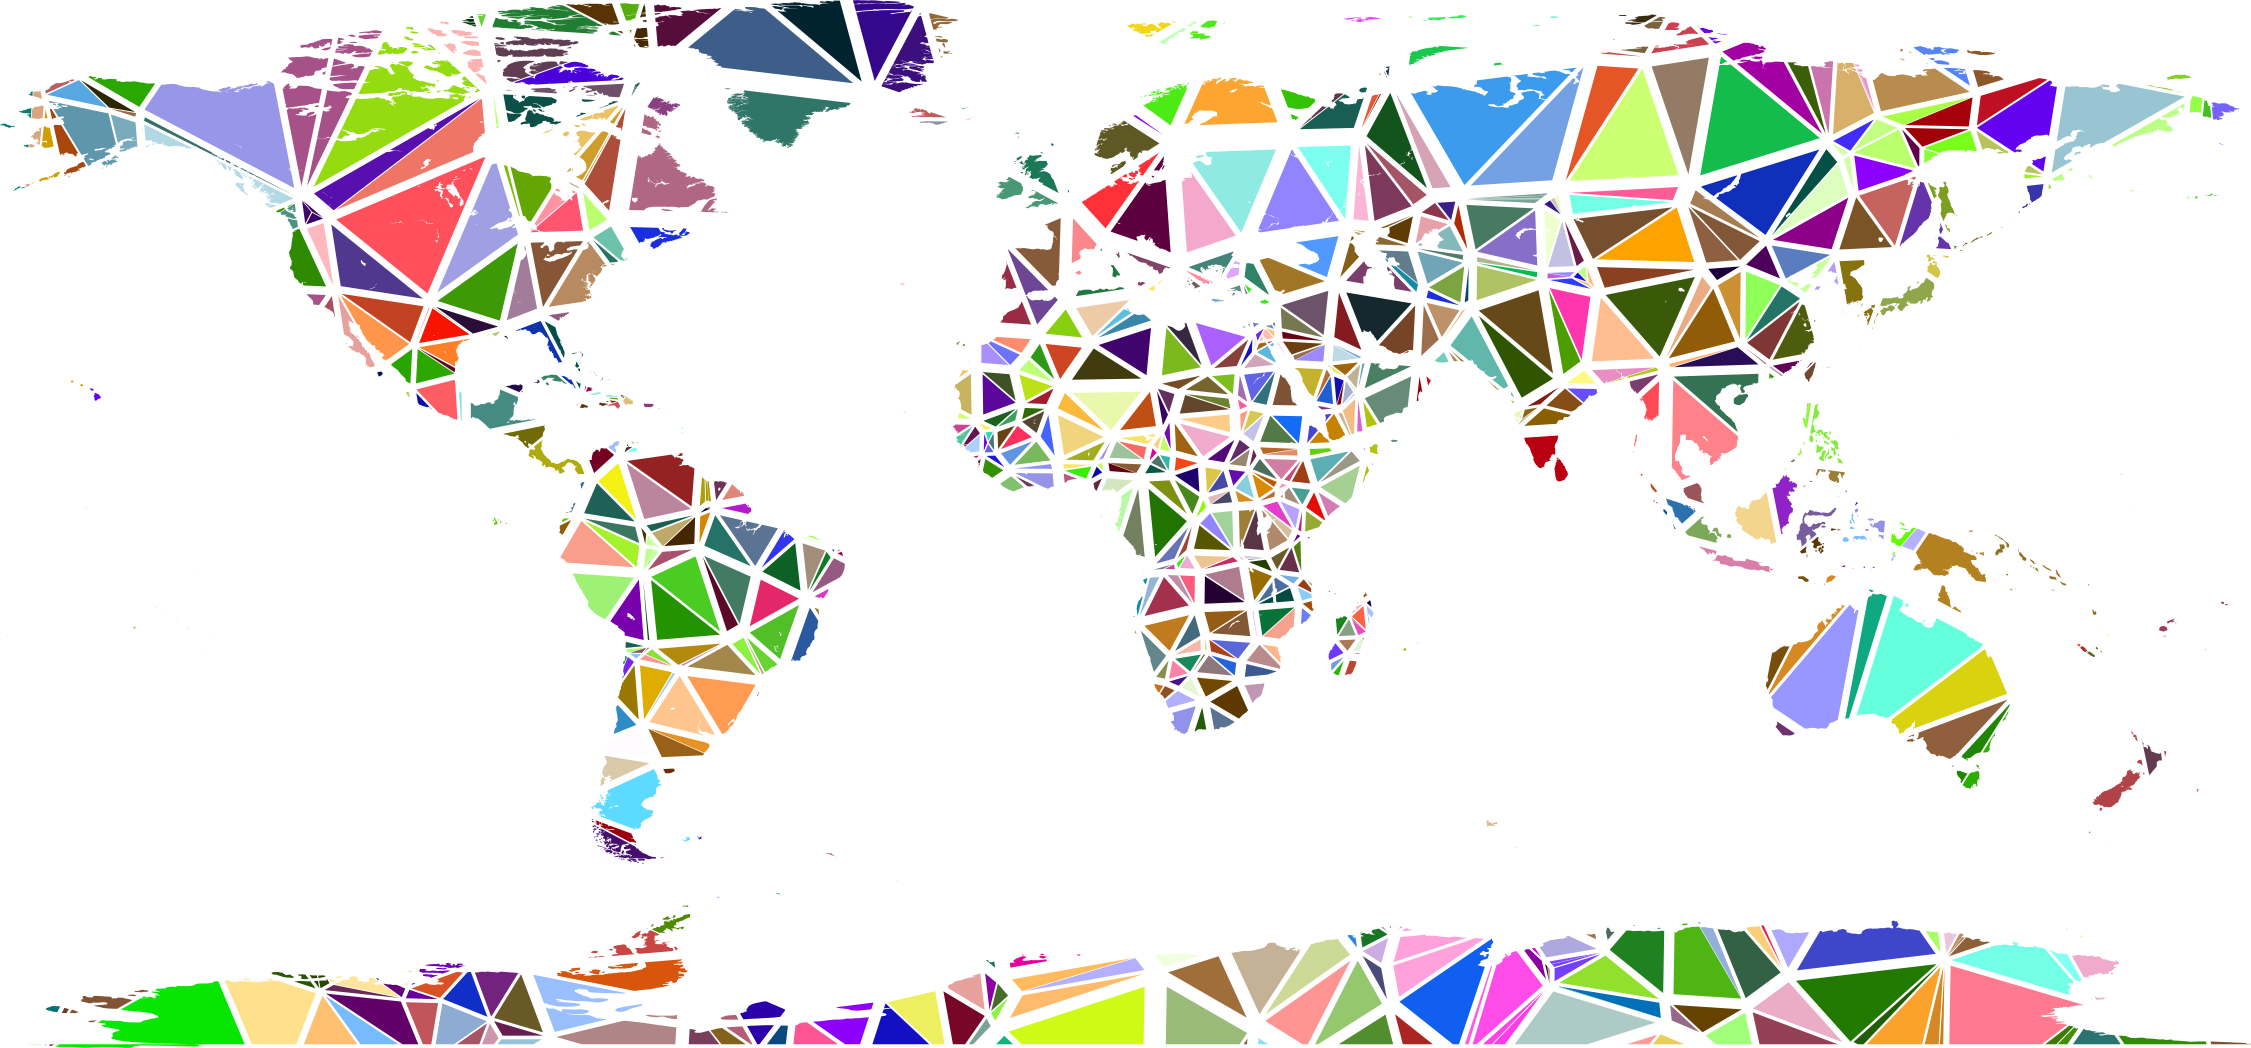 clipart world colorful